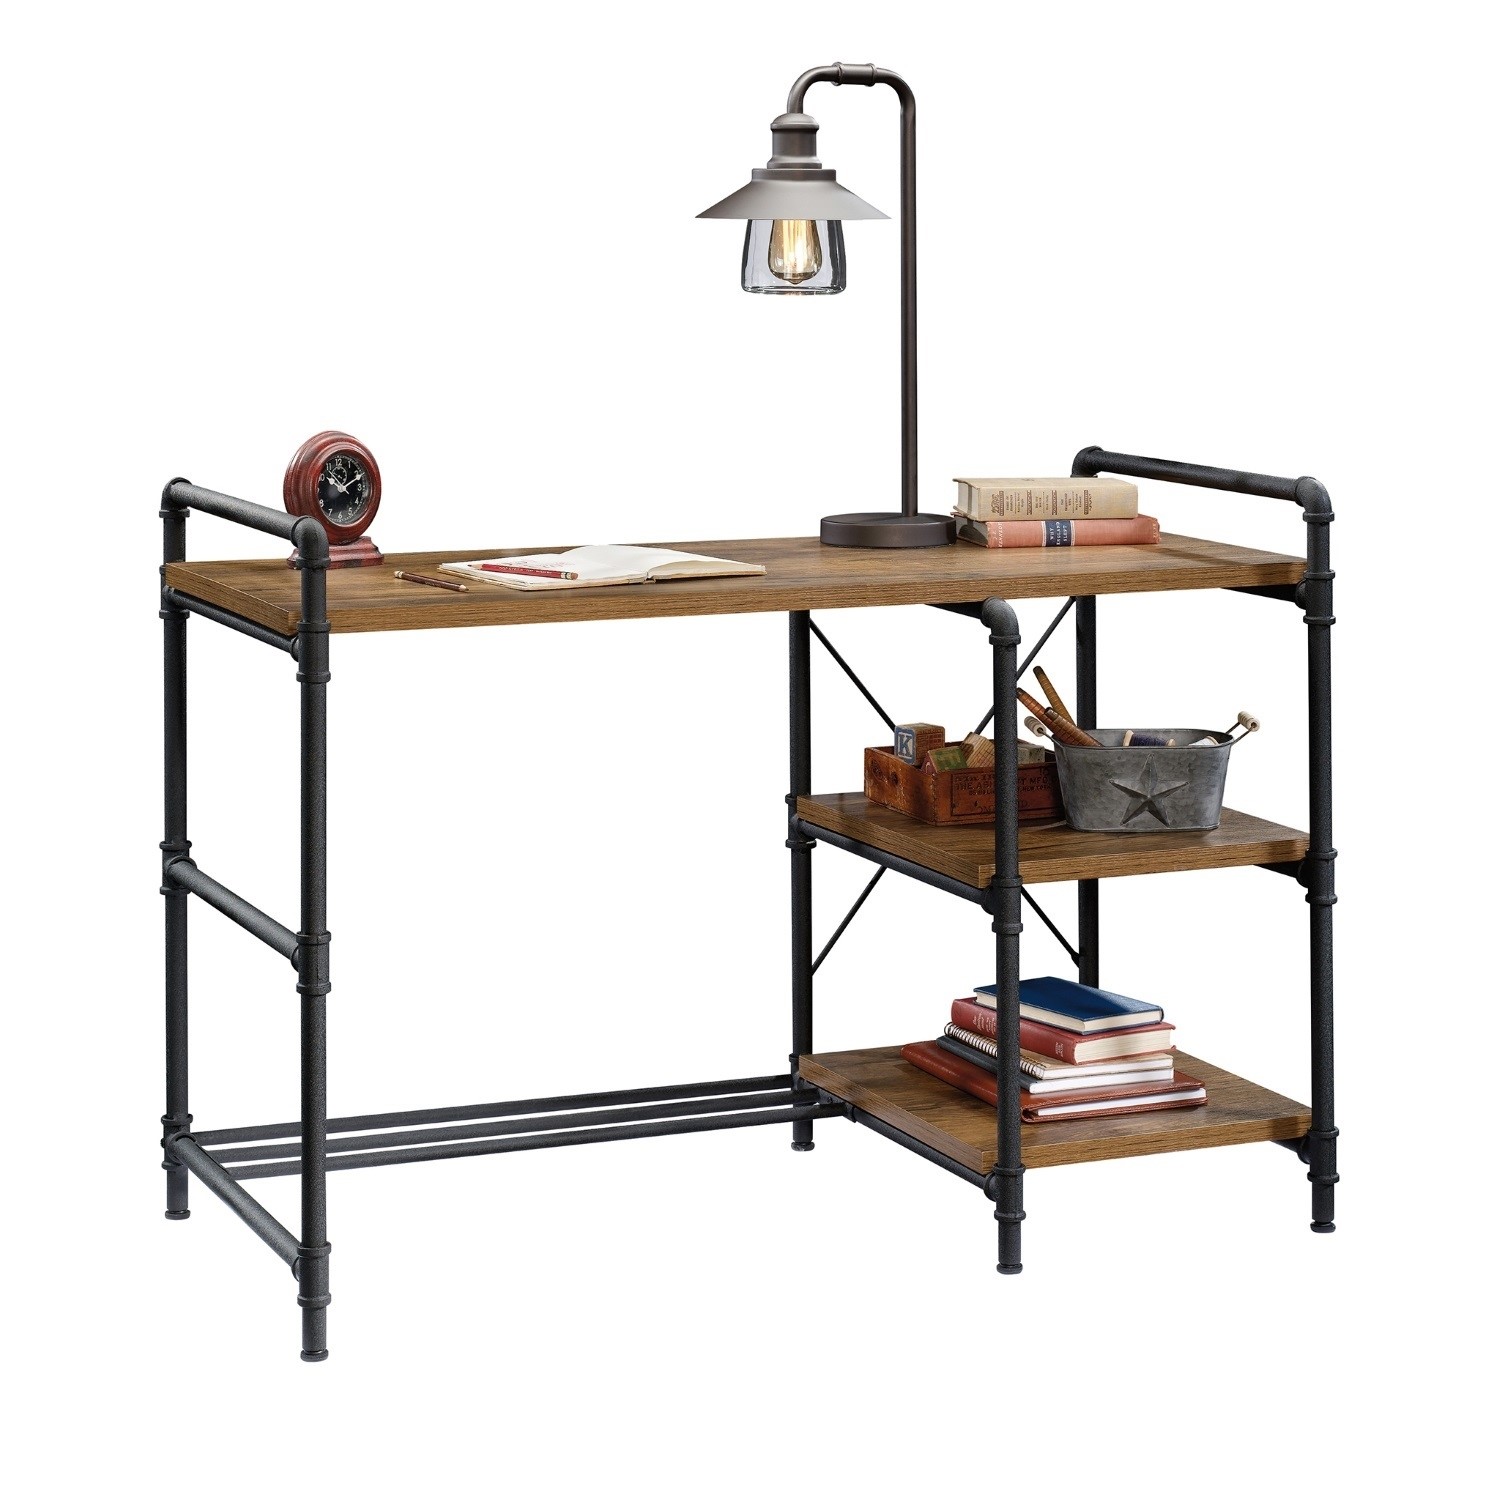 Read more about Oak effect industrial office desk with 2 shelves iron foundry teknik